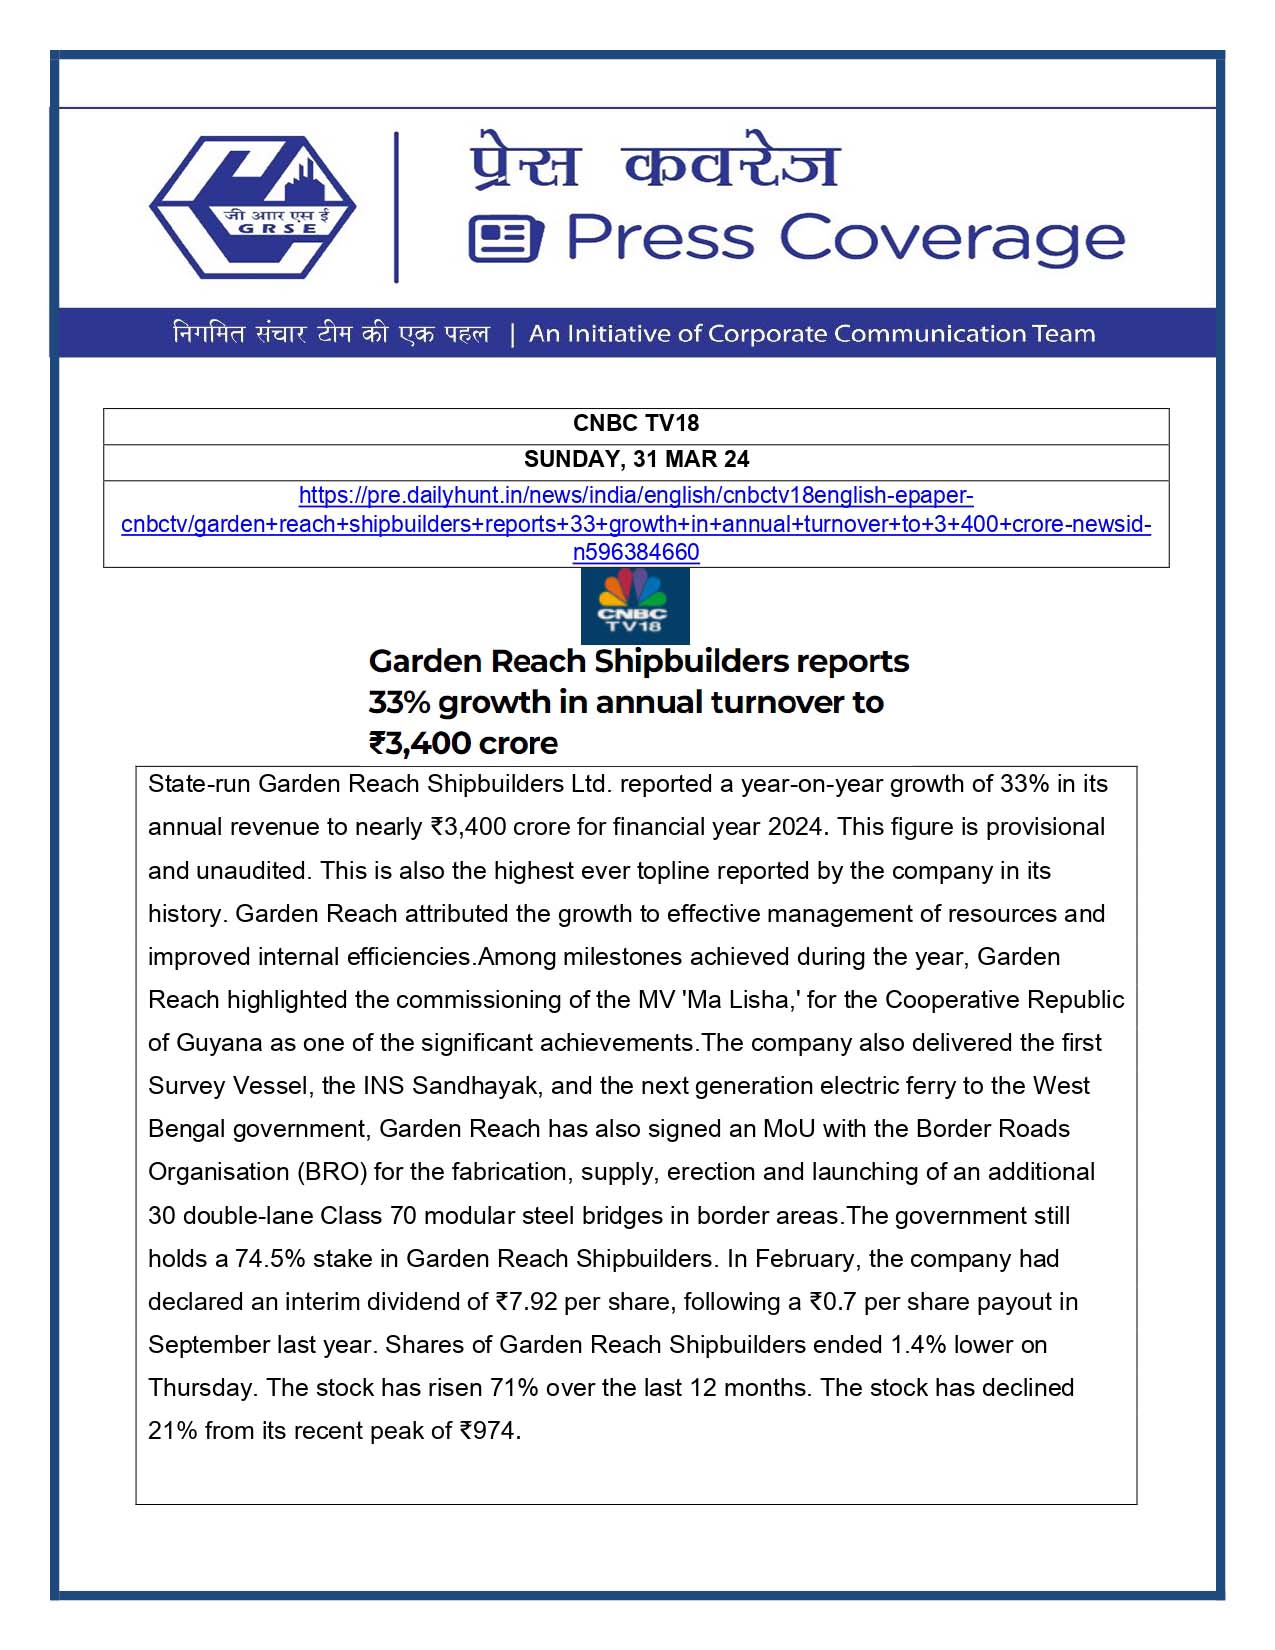 Press Coverage : CNBC TV18, 31 Mar 24 : Garden Reach Shipbuilders reports 33% growth in annual turnover to Rs 3400 crore